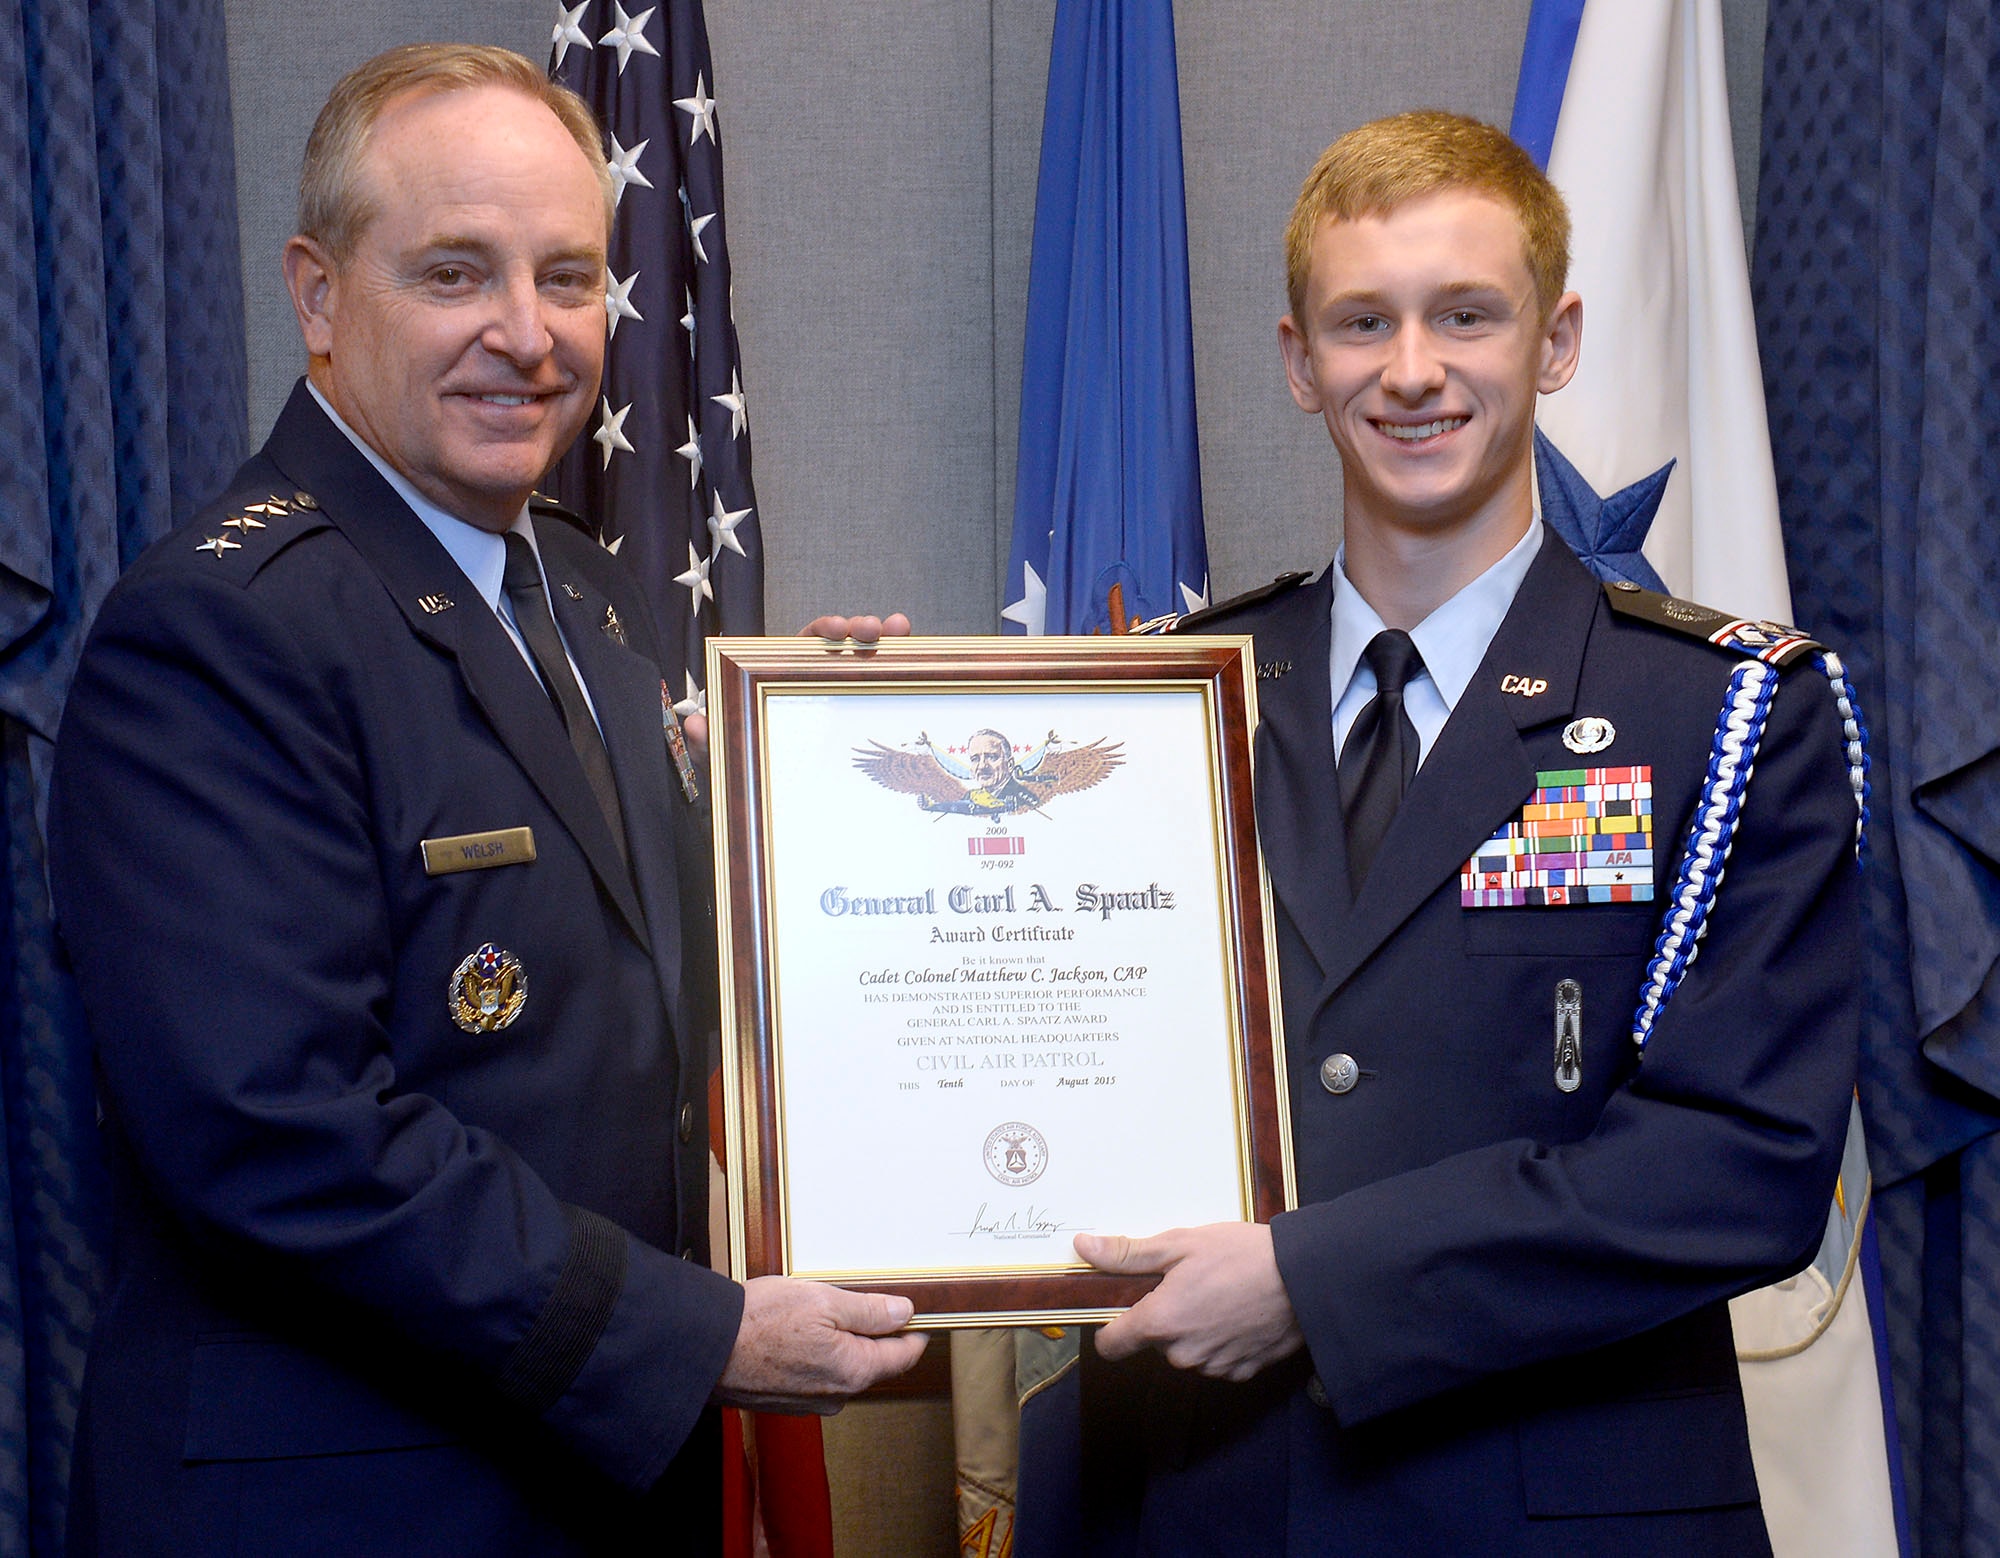 Air Force Chief of Staff Gen. Mark A. Welsh III presents Civil Air Patrol Cadet Matthew C. Jackson the General Carl A. Spaatz Award in the Pentagon, Nov. 9, 2015.  Jackson is the 2,000th recipient of this award, and he serves in the Twin Pine Composite Squadron of the New Jersey Wing, Civil Air Patrol, in West Trenton, N.J.  (U.S. Air Force photo/Scott M. Ash)